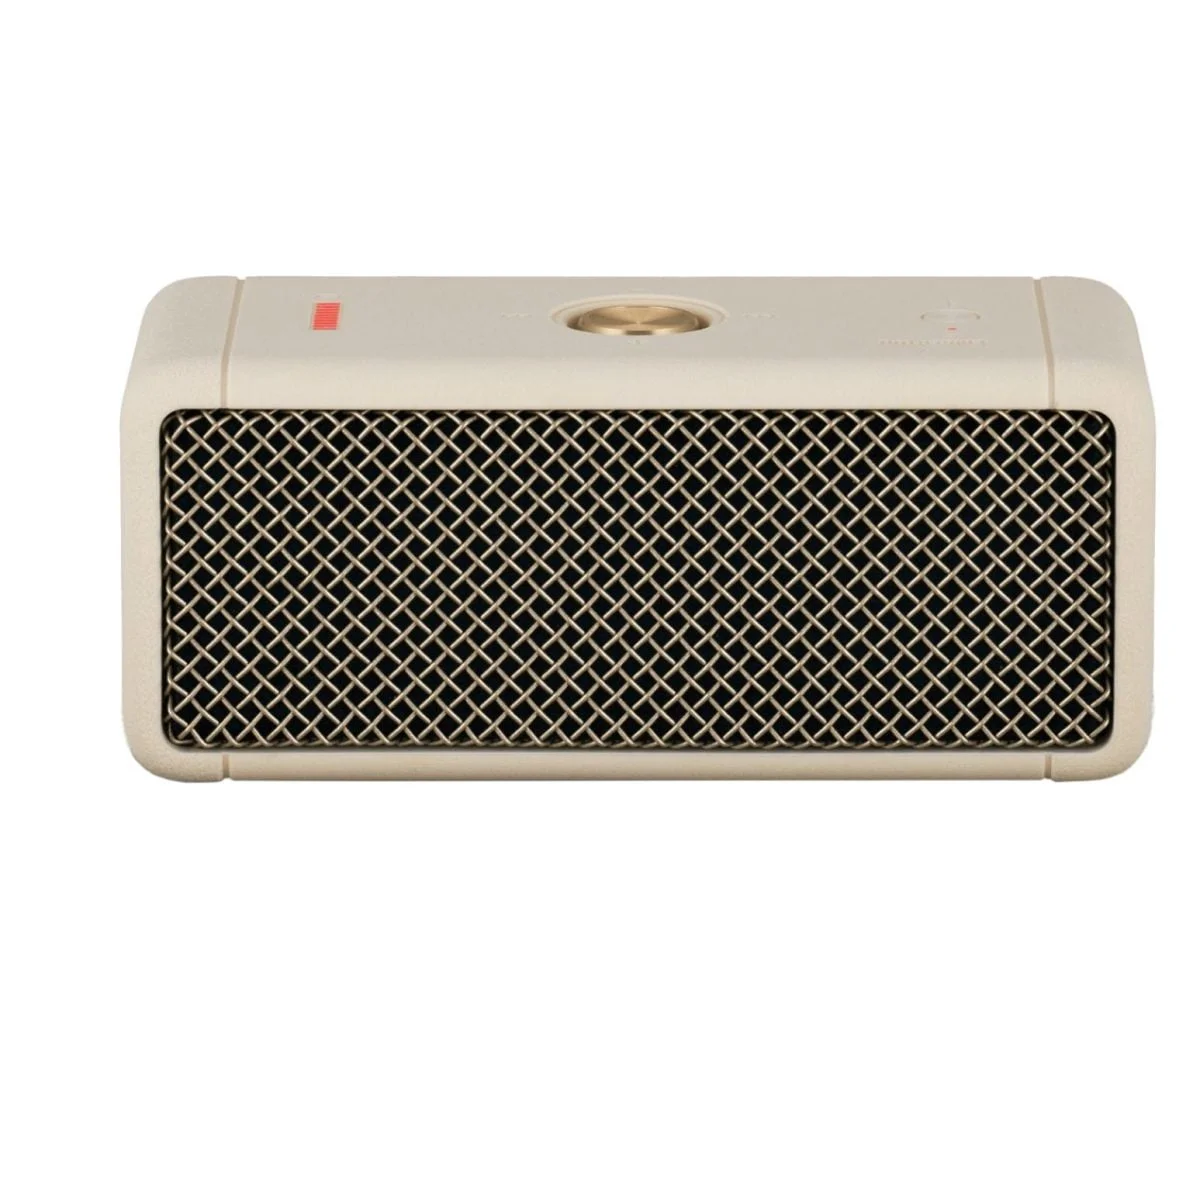 6463394Cv11D Marshall &Lt;H1&Gt;Marshall Emberton Portable Bluetooth Speaker - Cream&Lt;/H1&Gt; Https://Www.youtube.com/Watch?V=Wlqi1Ajwjs0 Emberton Is A Compact Portable Speaker With The Loud And Vibrant Sound Only Marshall Can Deliver. Emberton Utilises True Stereophonic, A Unique Form Of Multi-Directional Sound From Marshall. Experience Absolute 360° Sound Where Every Spot Is A Sweet Spot. With 20+ Hours Of Playtime, You Can Enjoy The Superior Sound Of Marshall For Hours On End. Marshall Emberton Bluetooth Speaker Marshall Emberton Bluetooth Speaker - Cream